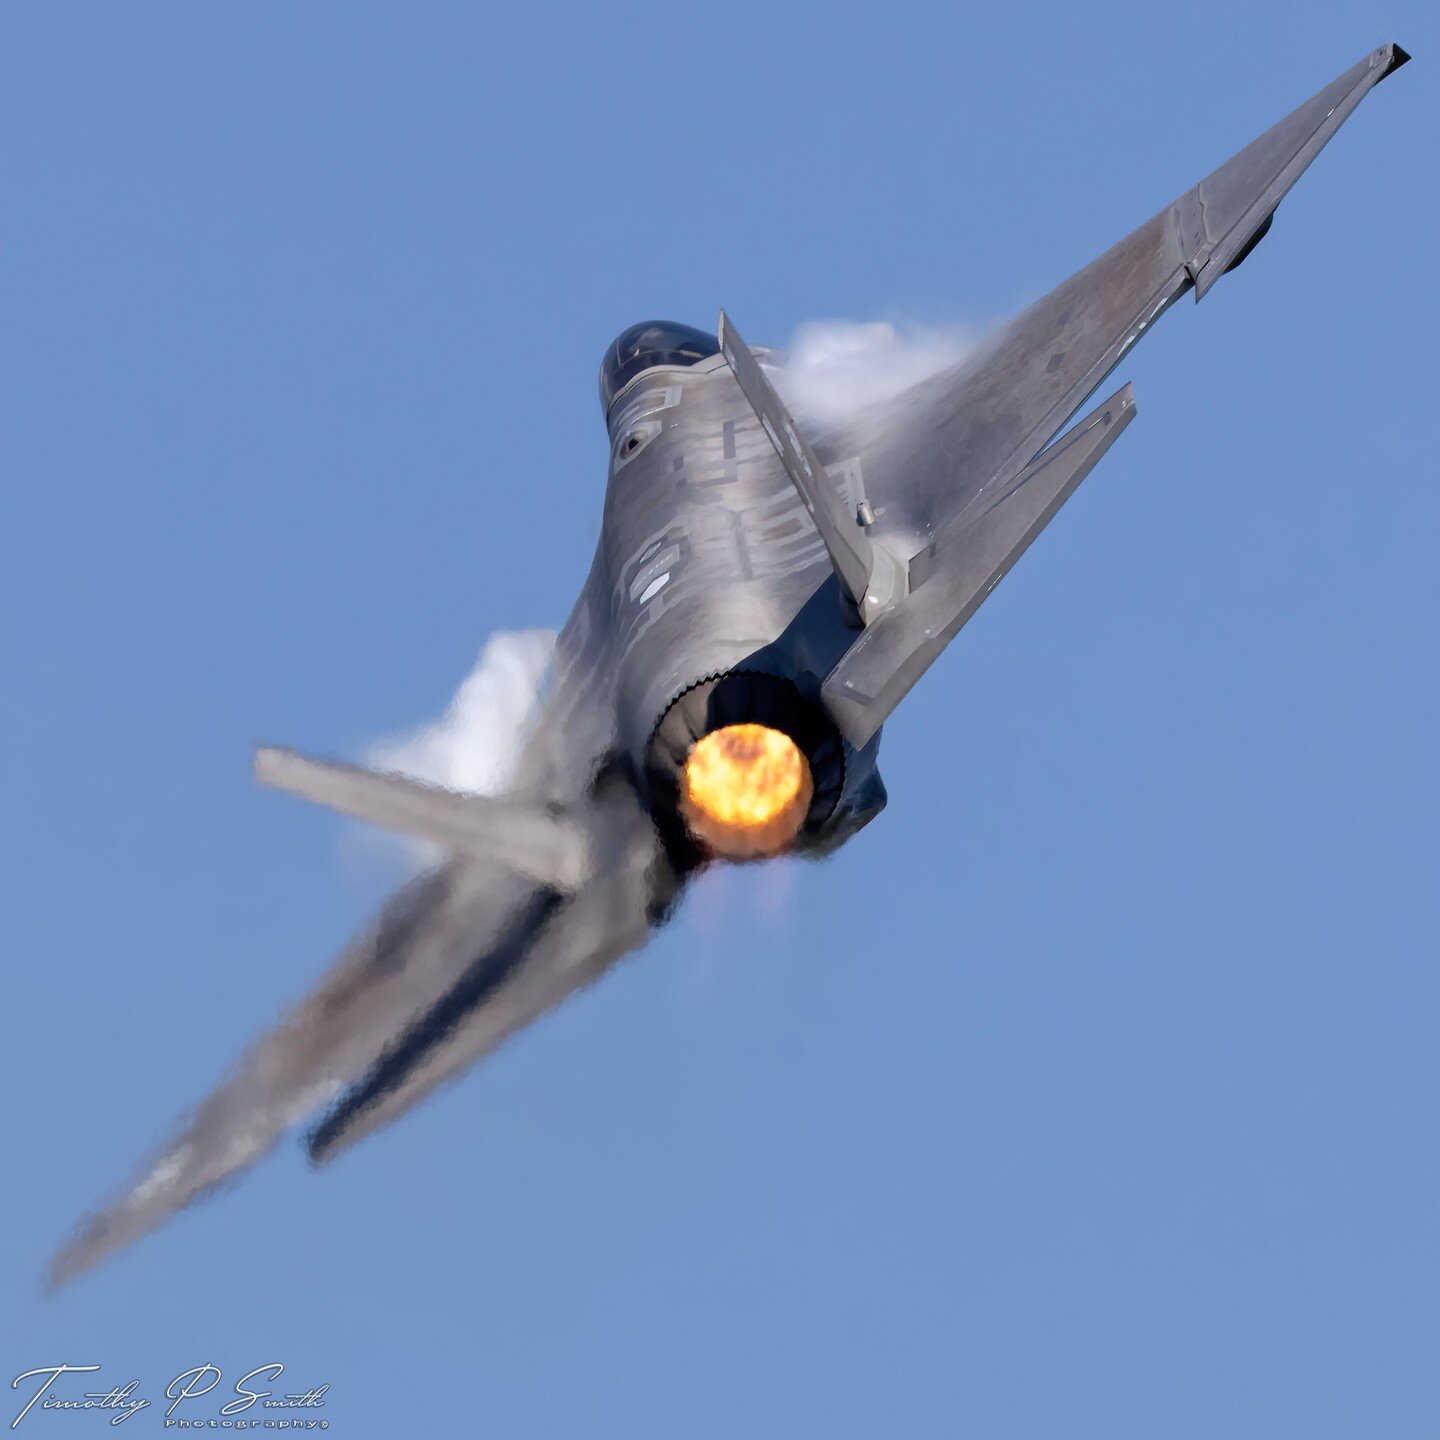 Revving up the skies with lightning-fast action from the New Orleans airshow last weekend! The US Navy&rsquo;s @f35c_demoteam electrified the crowd with lightning, demonstrating the speed and agility of the F-35C Lightning II. 

~~~~~~~~~~~~~~~~~~~~~